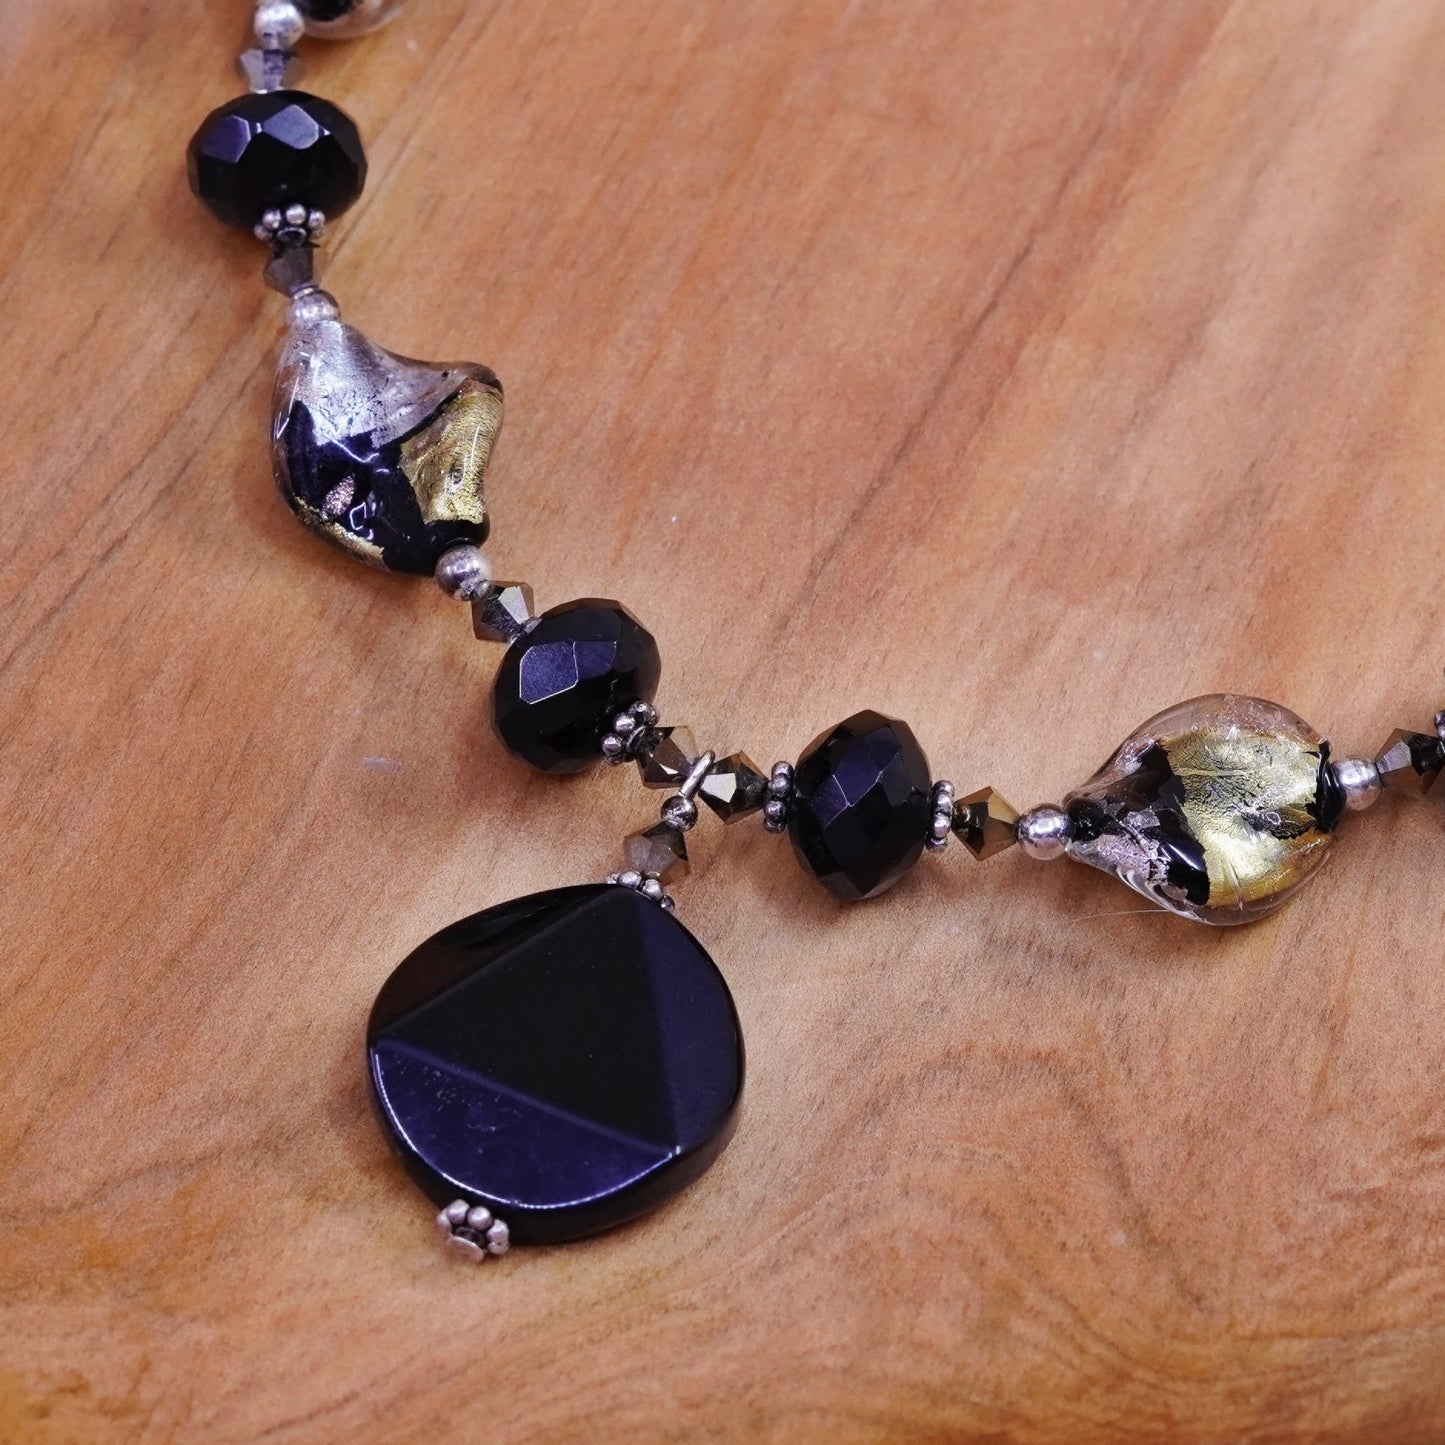 16+2”, sterling 925 silver chain necklace with obsidian beads and pendant